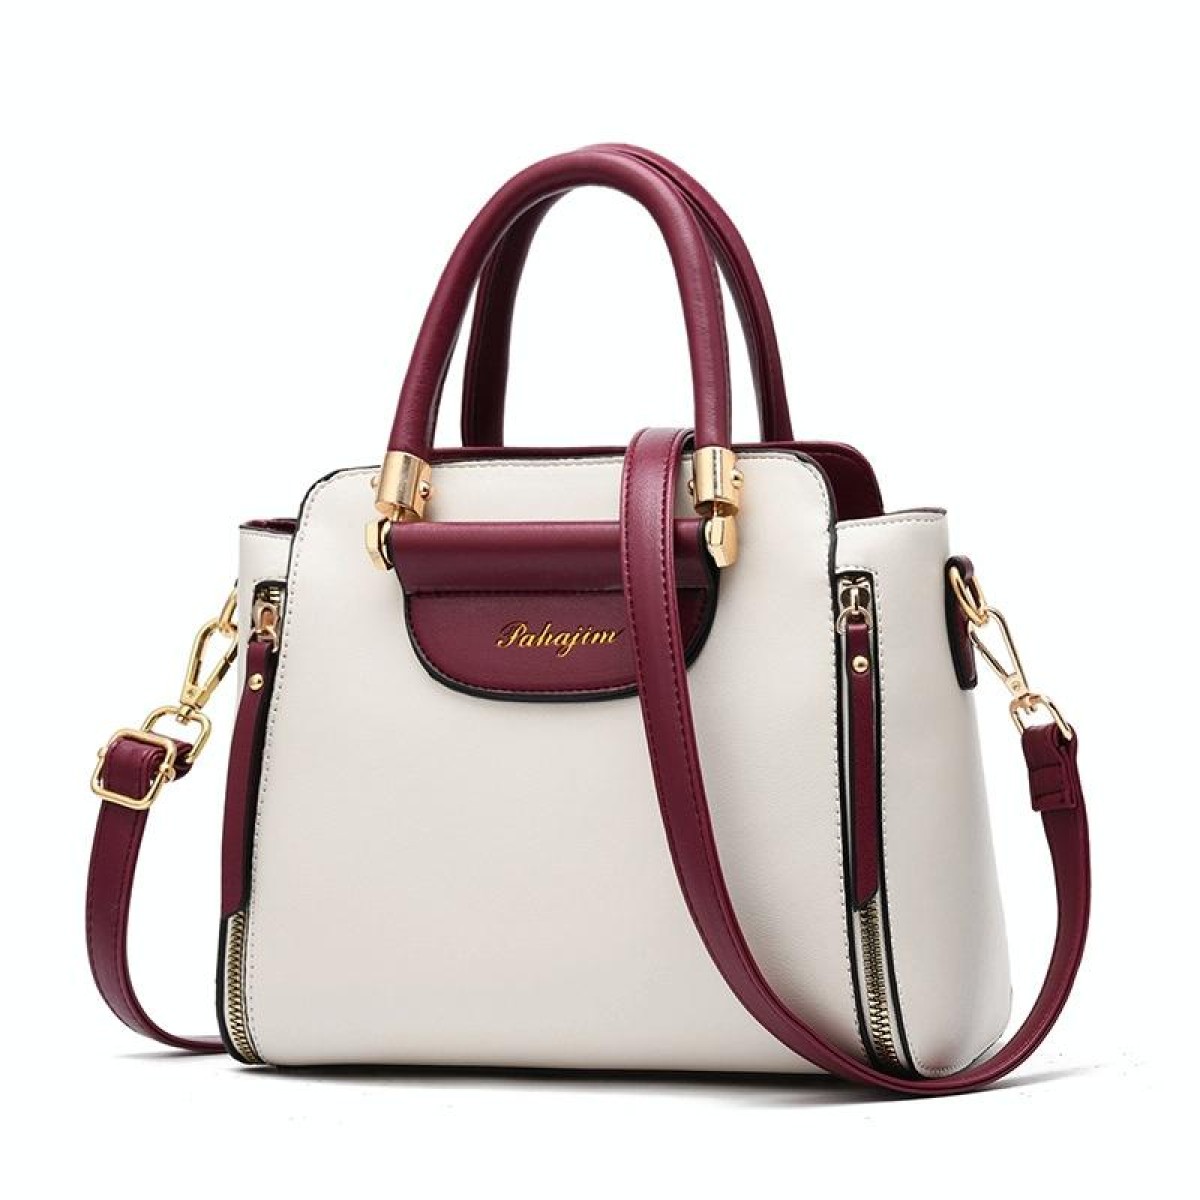 TFZ 572 PU Material Contrast Color Ladies Handbag(Red Wine White)